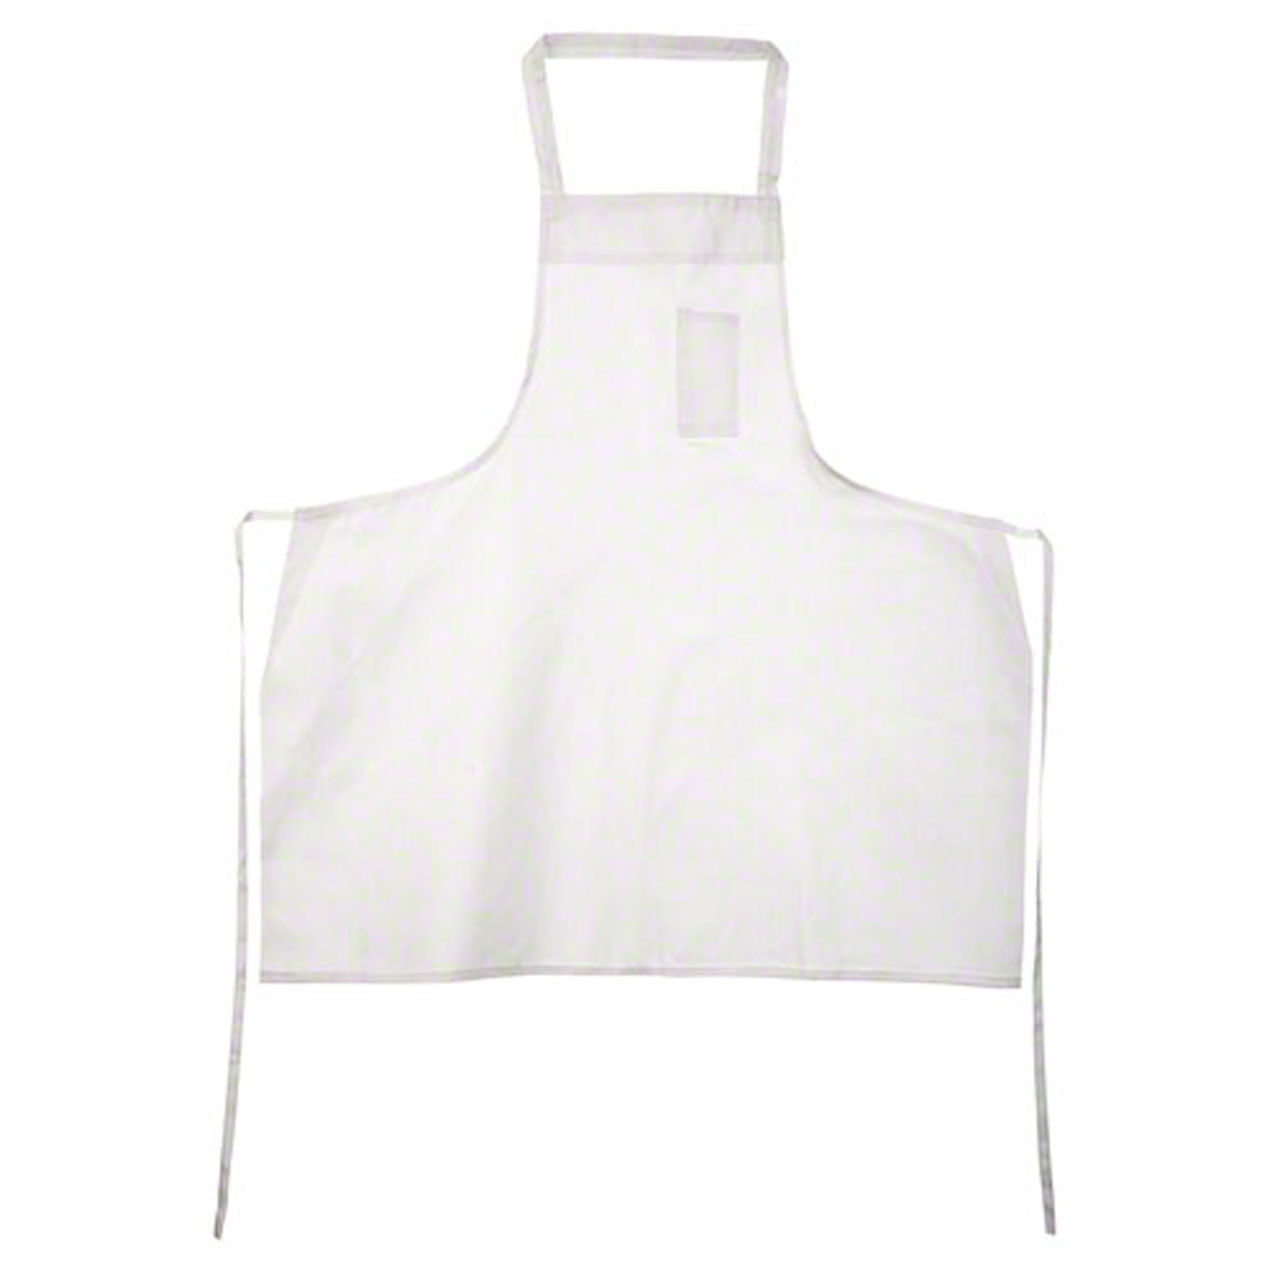 What are the size specifications for the cheap white aprons in the White Economy Bib Aprons range?